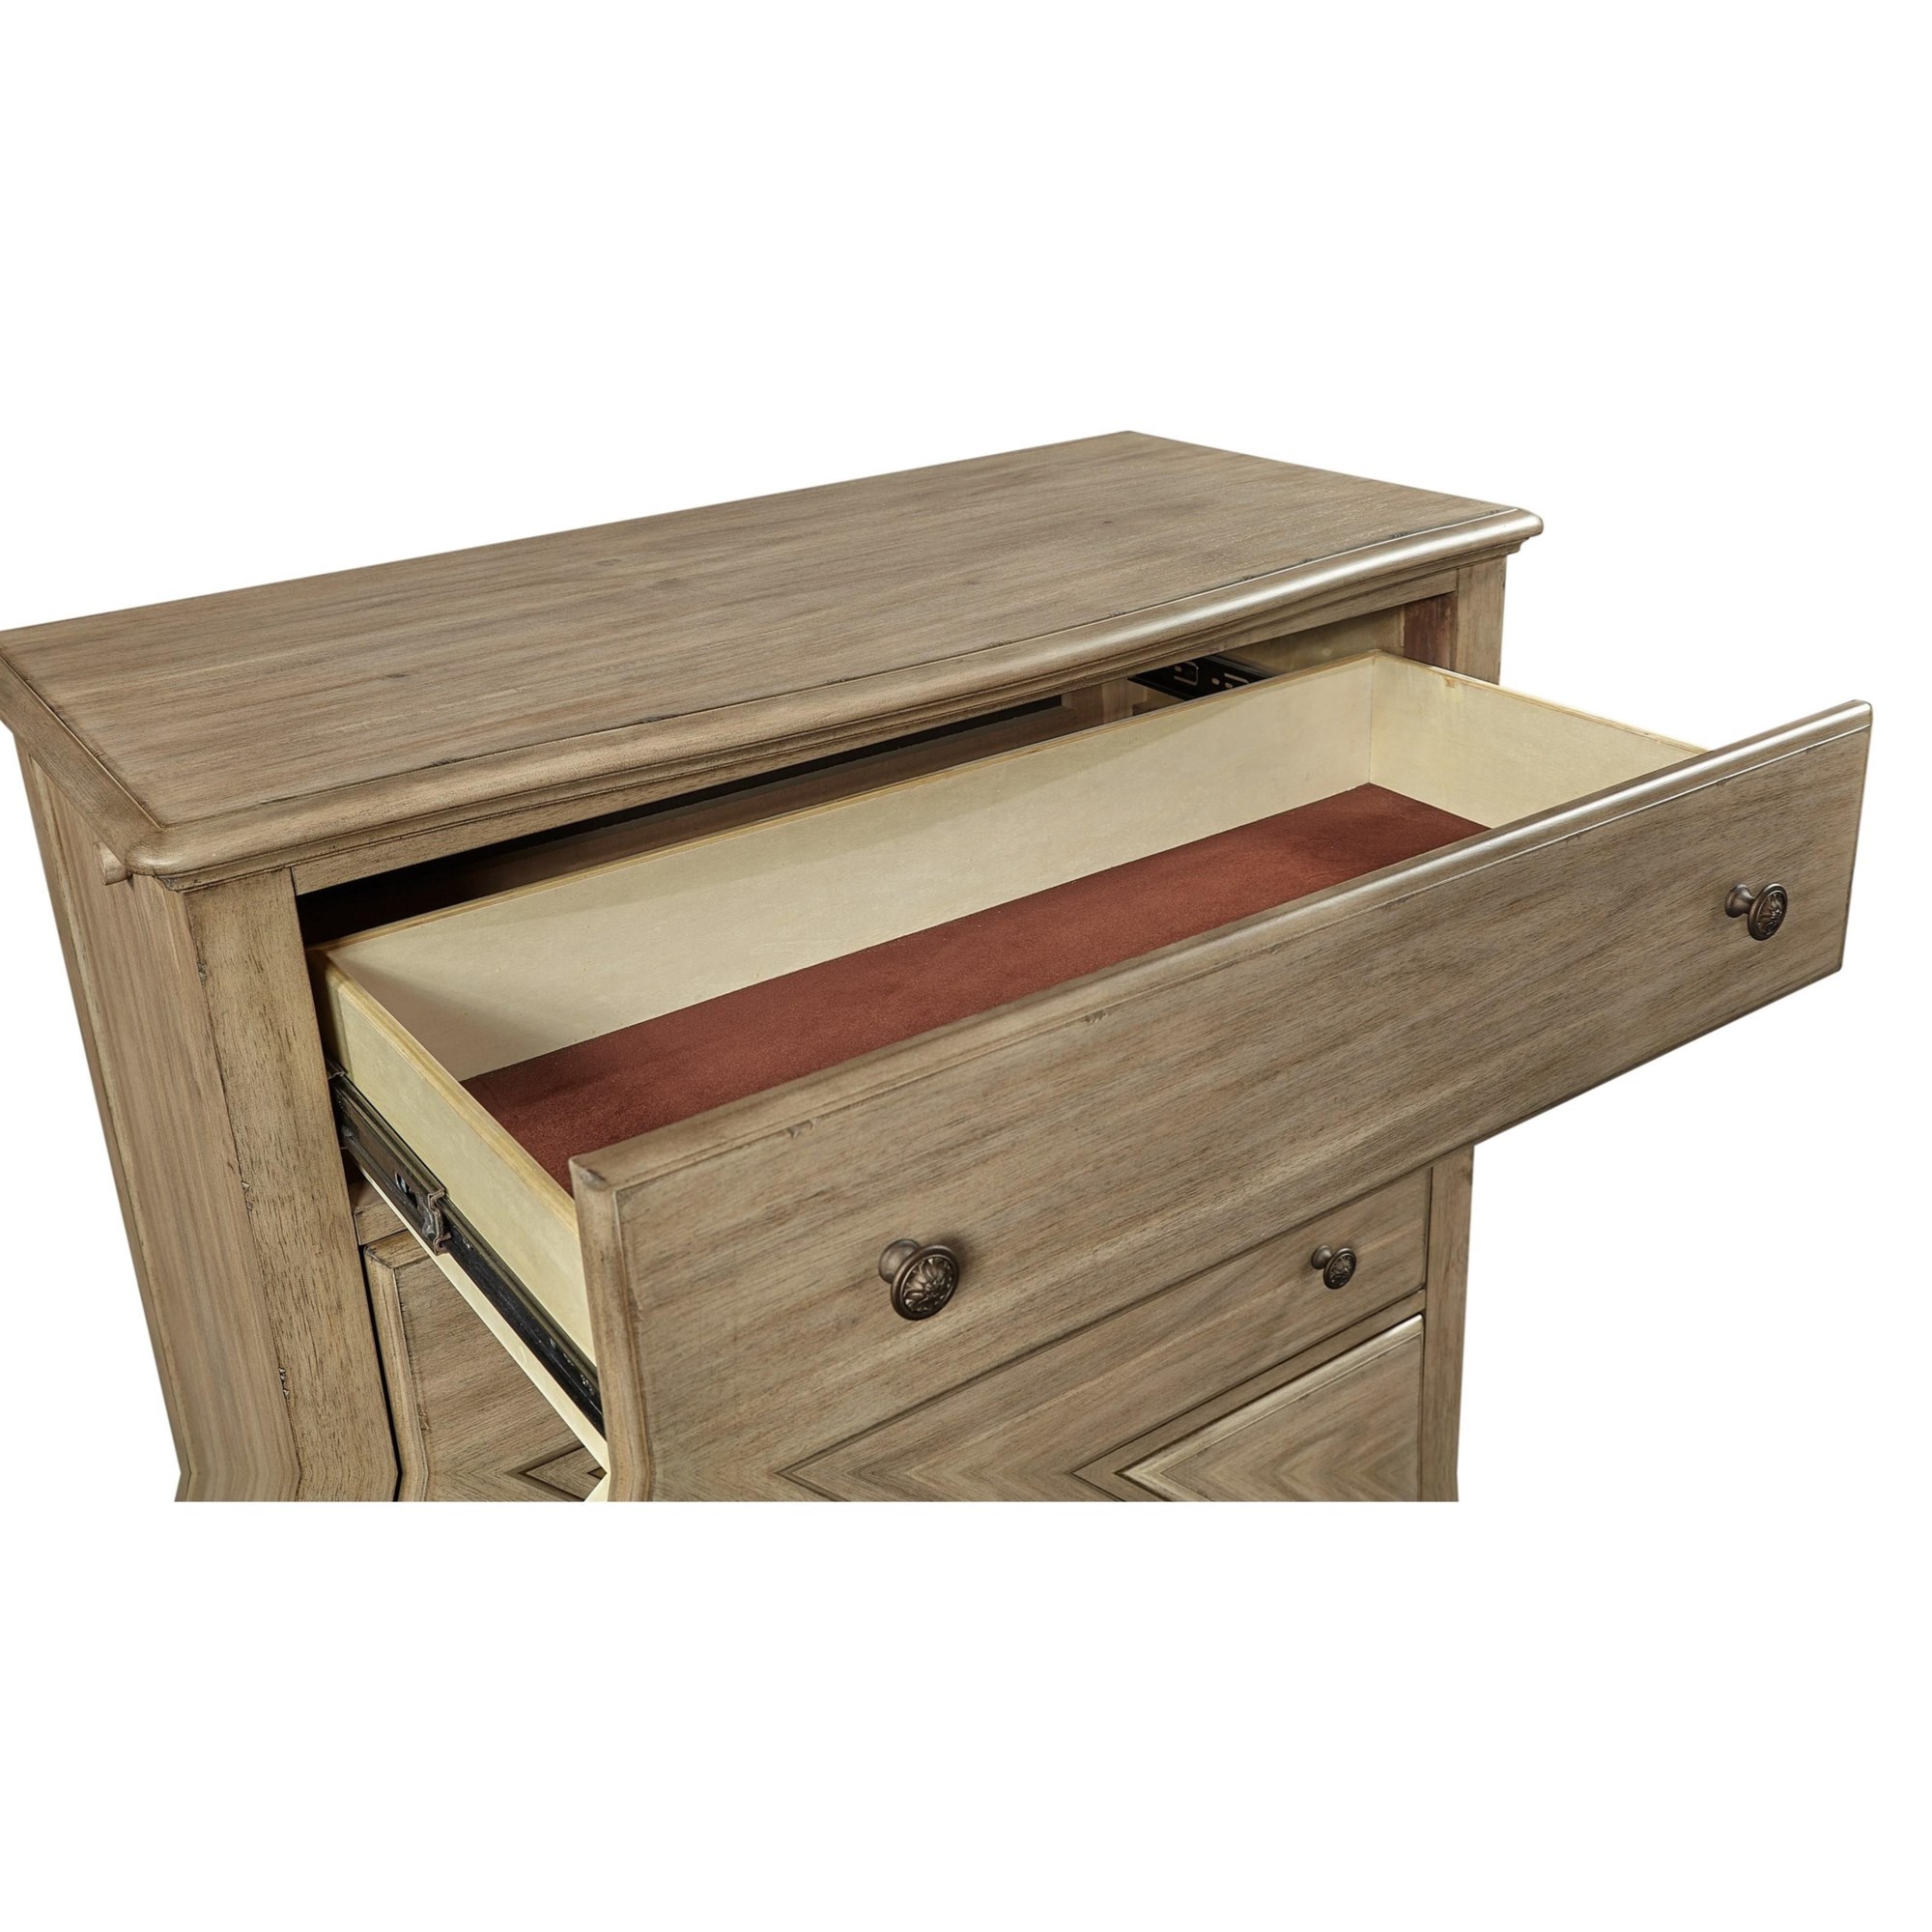 Aspenhome Provence I222-456 Casual 5-Drawer Chest with Felt-Lined